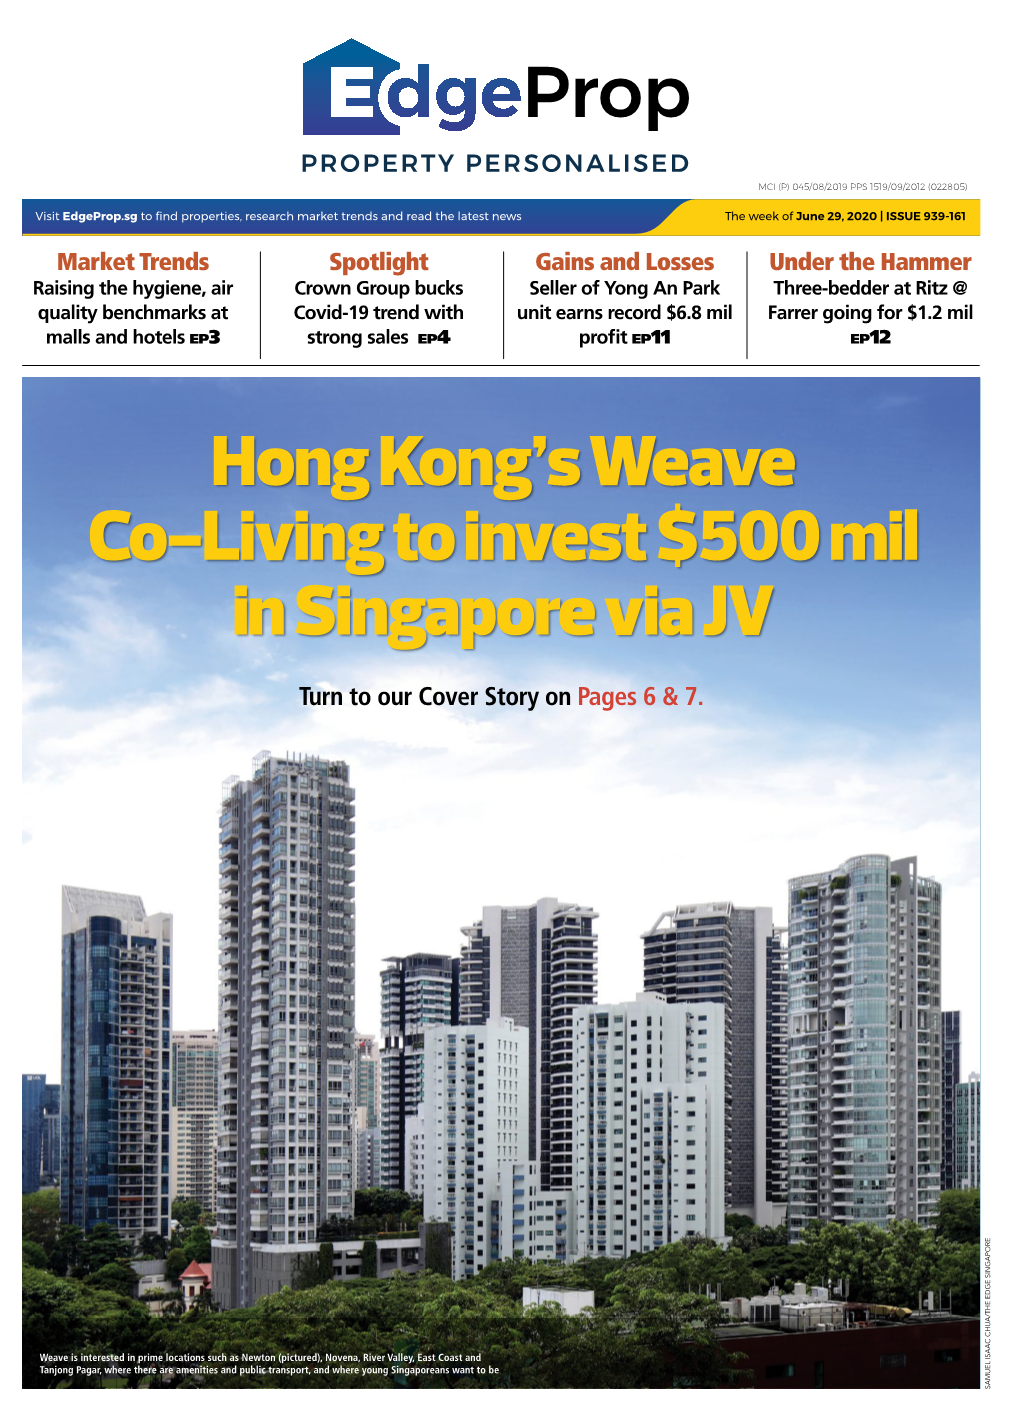 Hong Kong's Weave Co-Living to Invest $500 Mil in Singapore Via JV